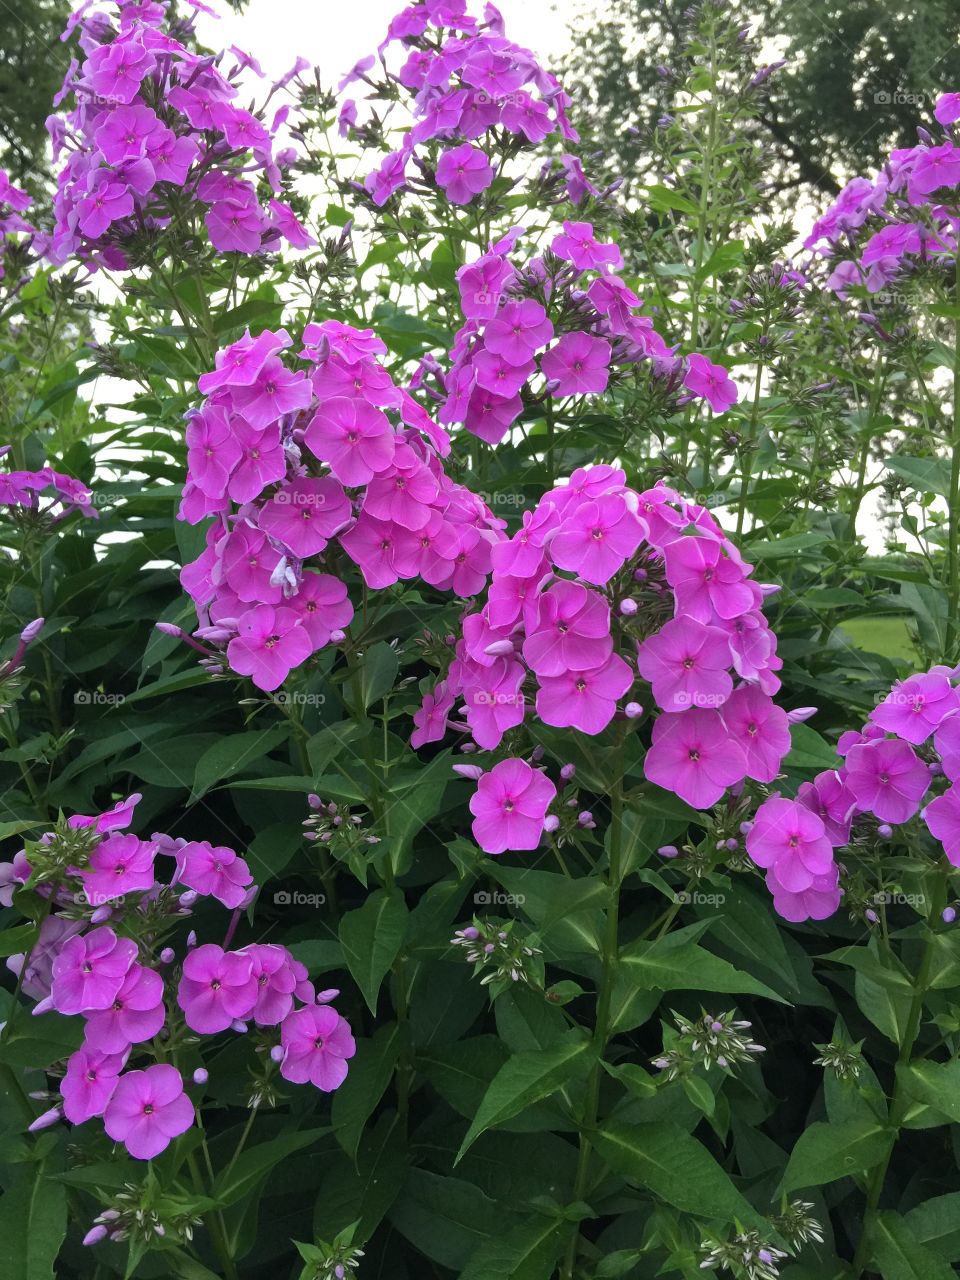 Foxy Phlox. Beautiful purple blooms on strong steady stalks, the Phlox is one of my favorite flowers.